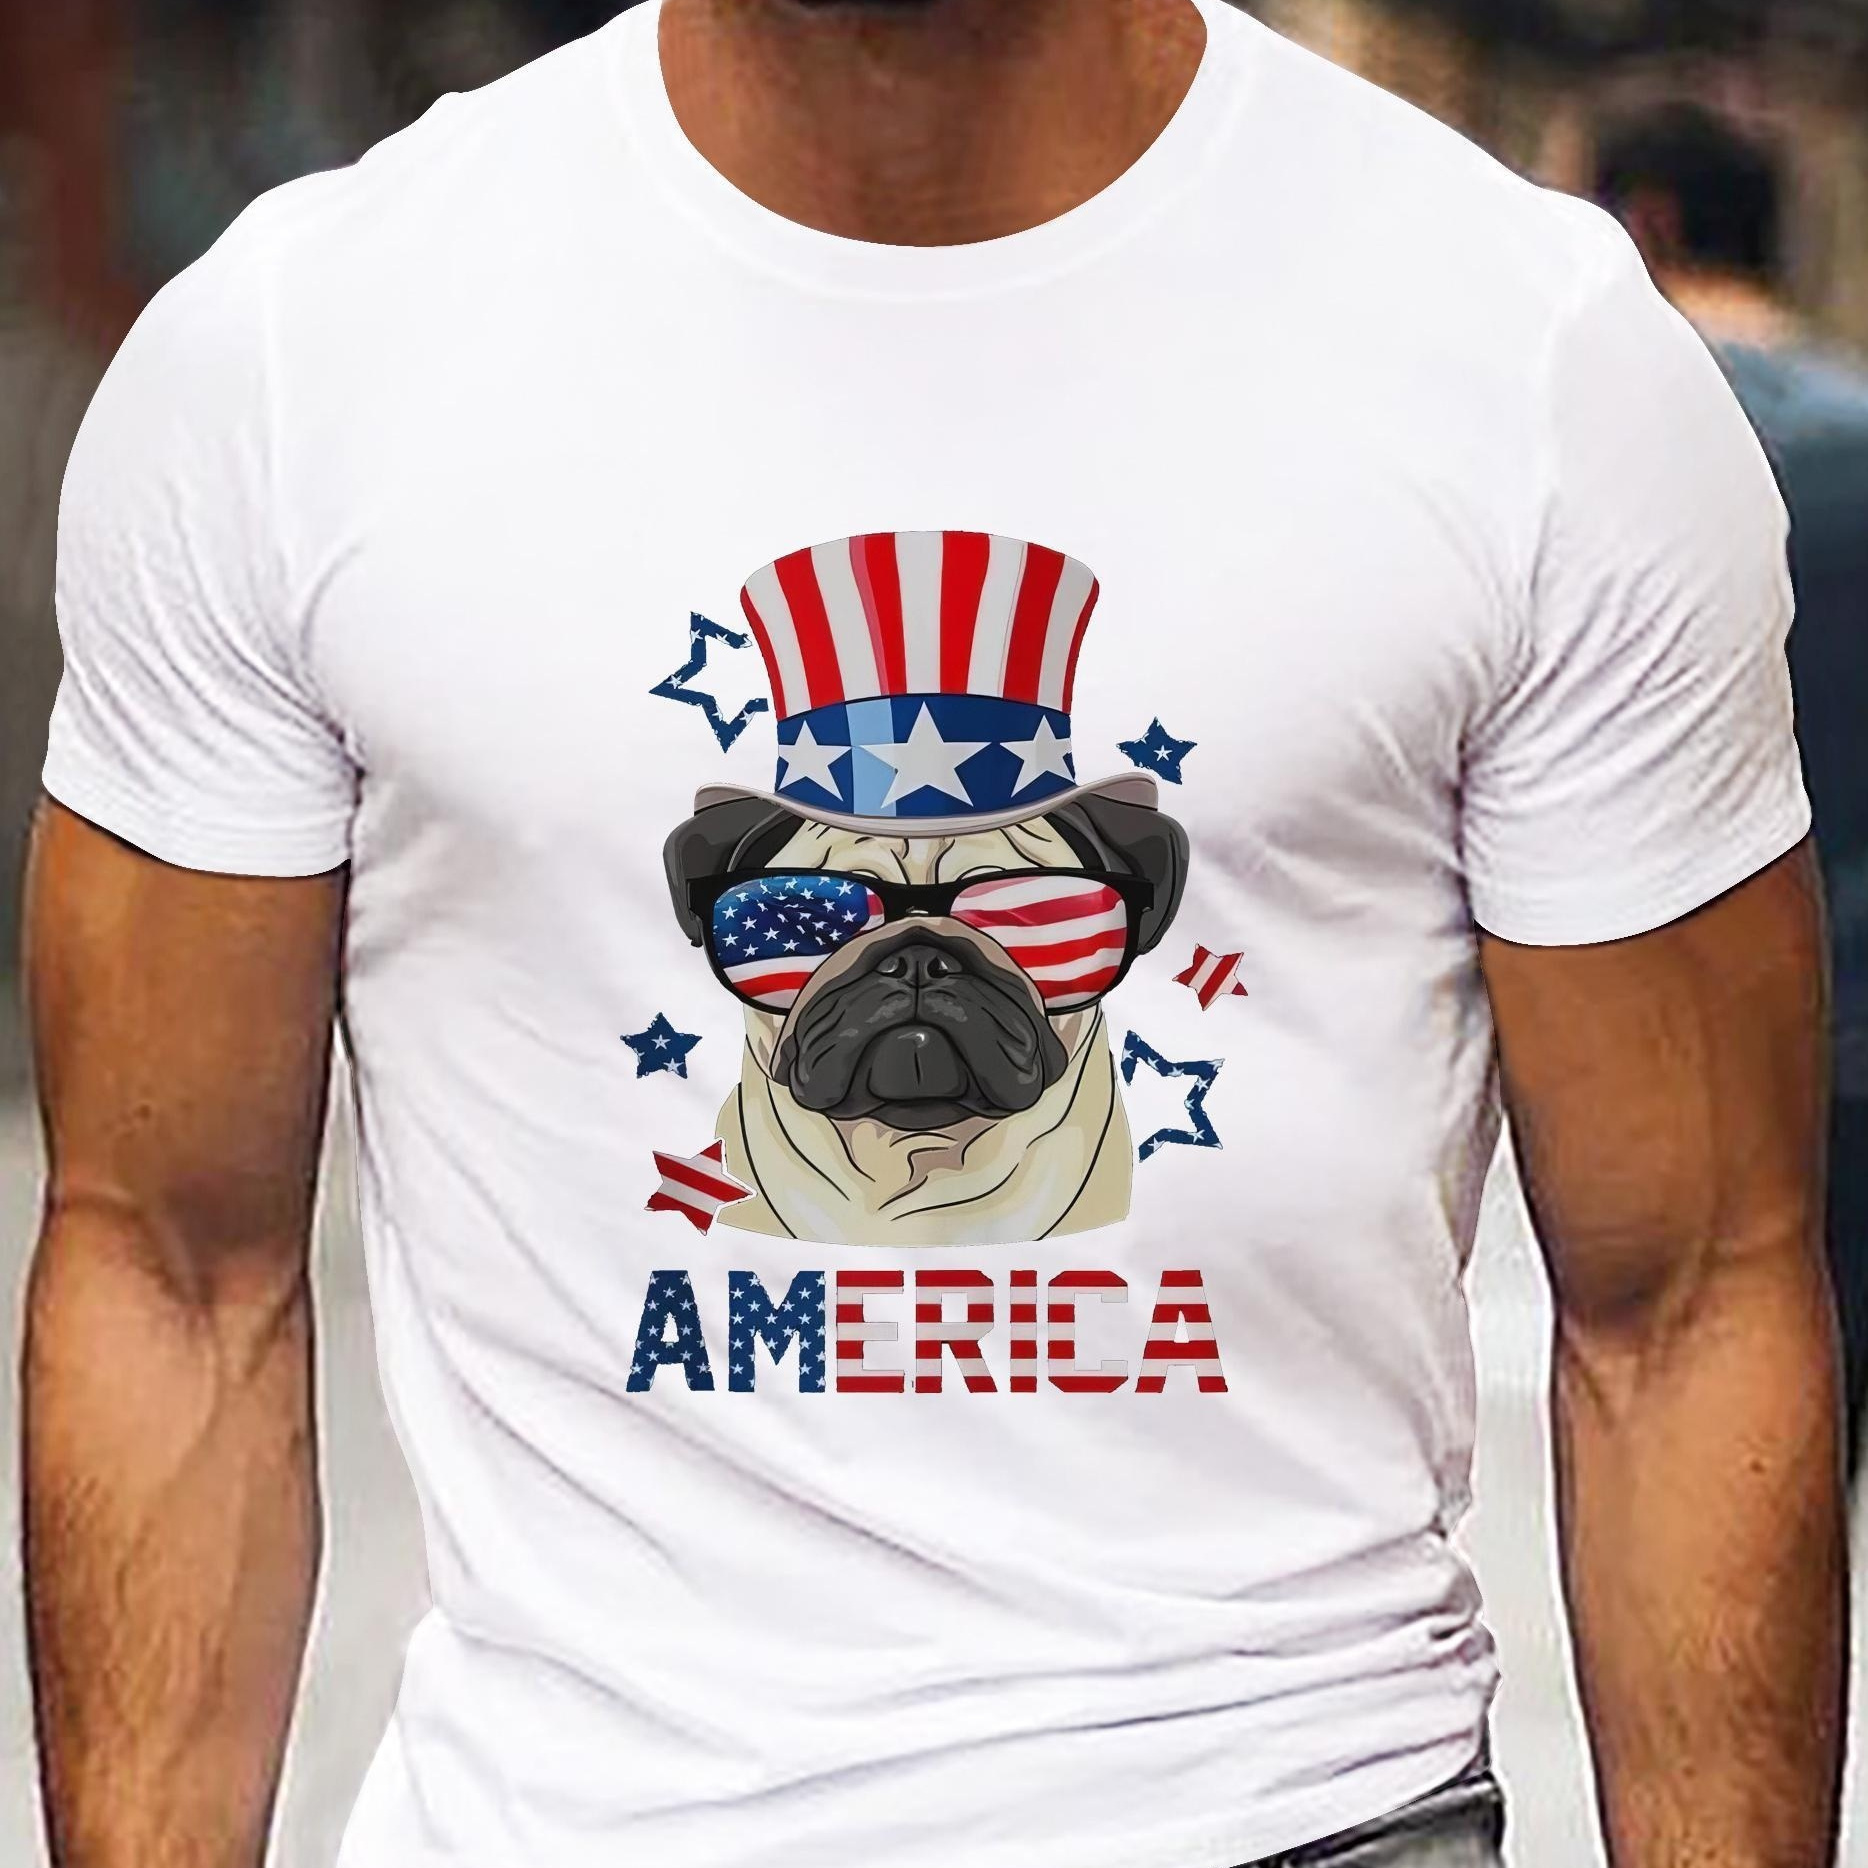 

America Dog, Independence Day Theme Print Tee Shirt, Tees For Men, Casual Short Sleeve T-shirt For Summer